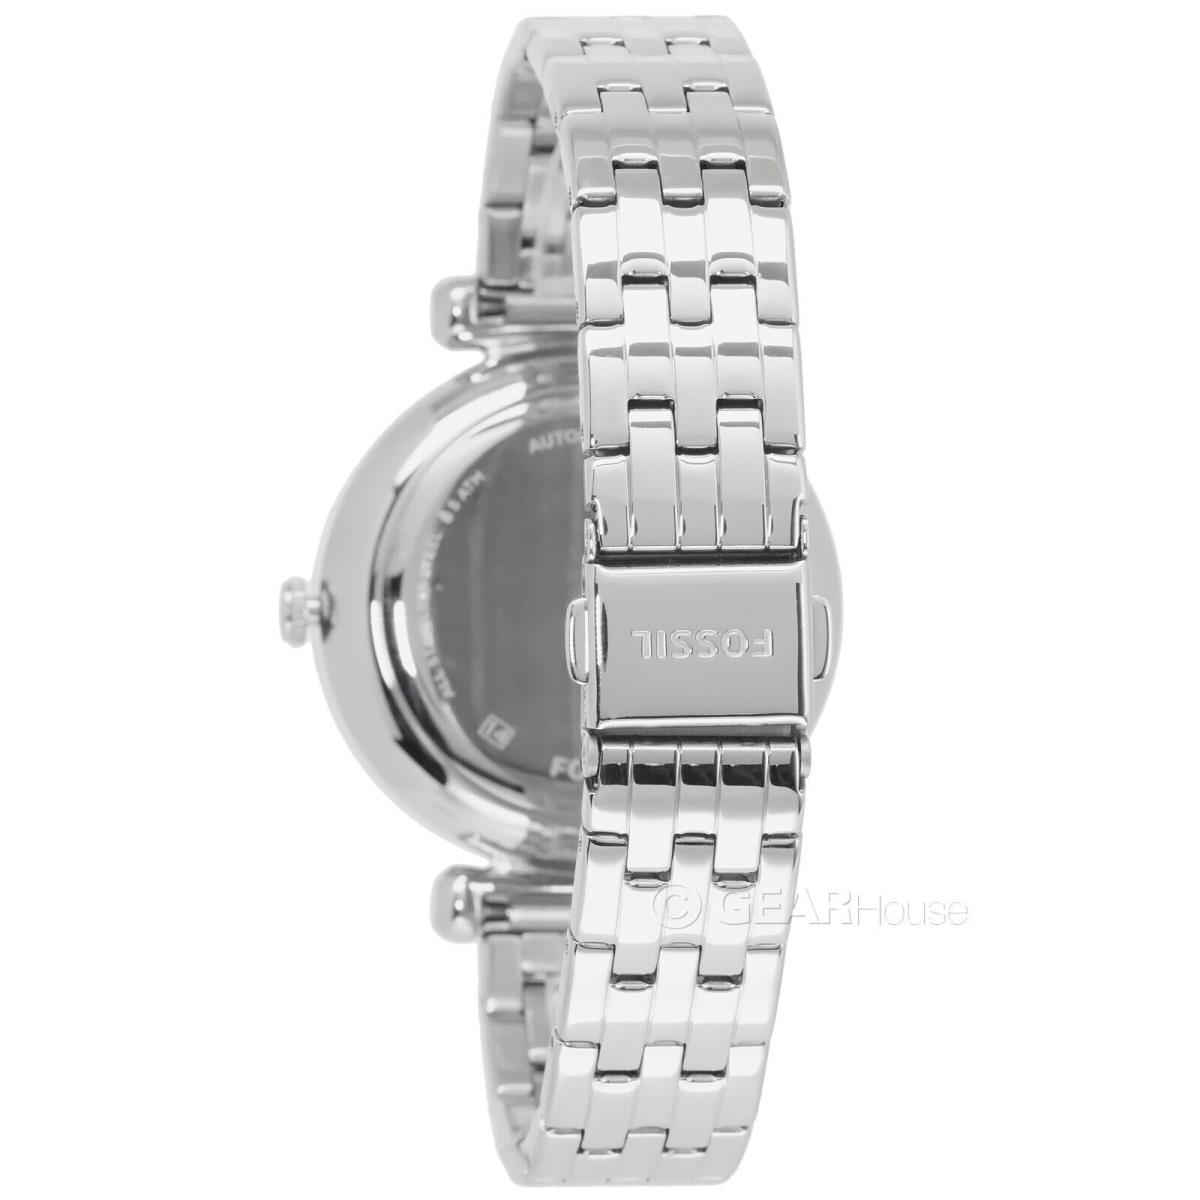 Fossil watch Tillie Automatic - Clear Dial, Silver Band, Silver Bezel